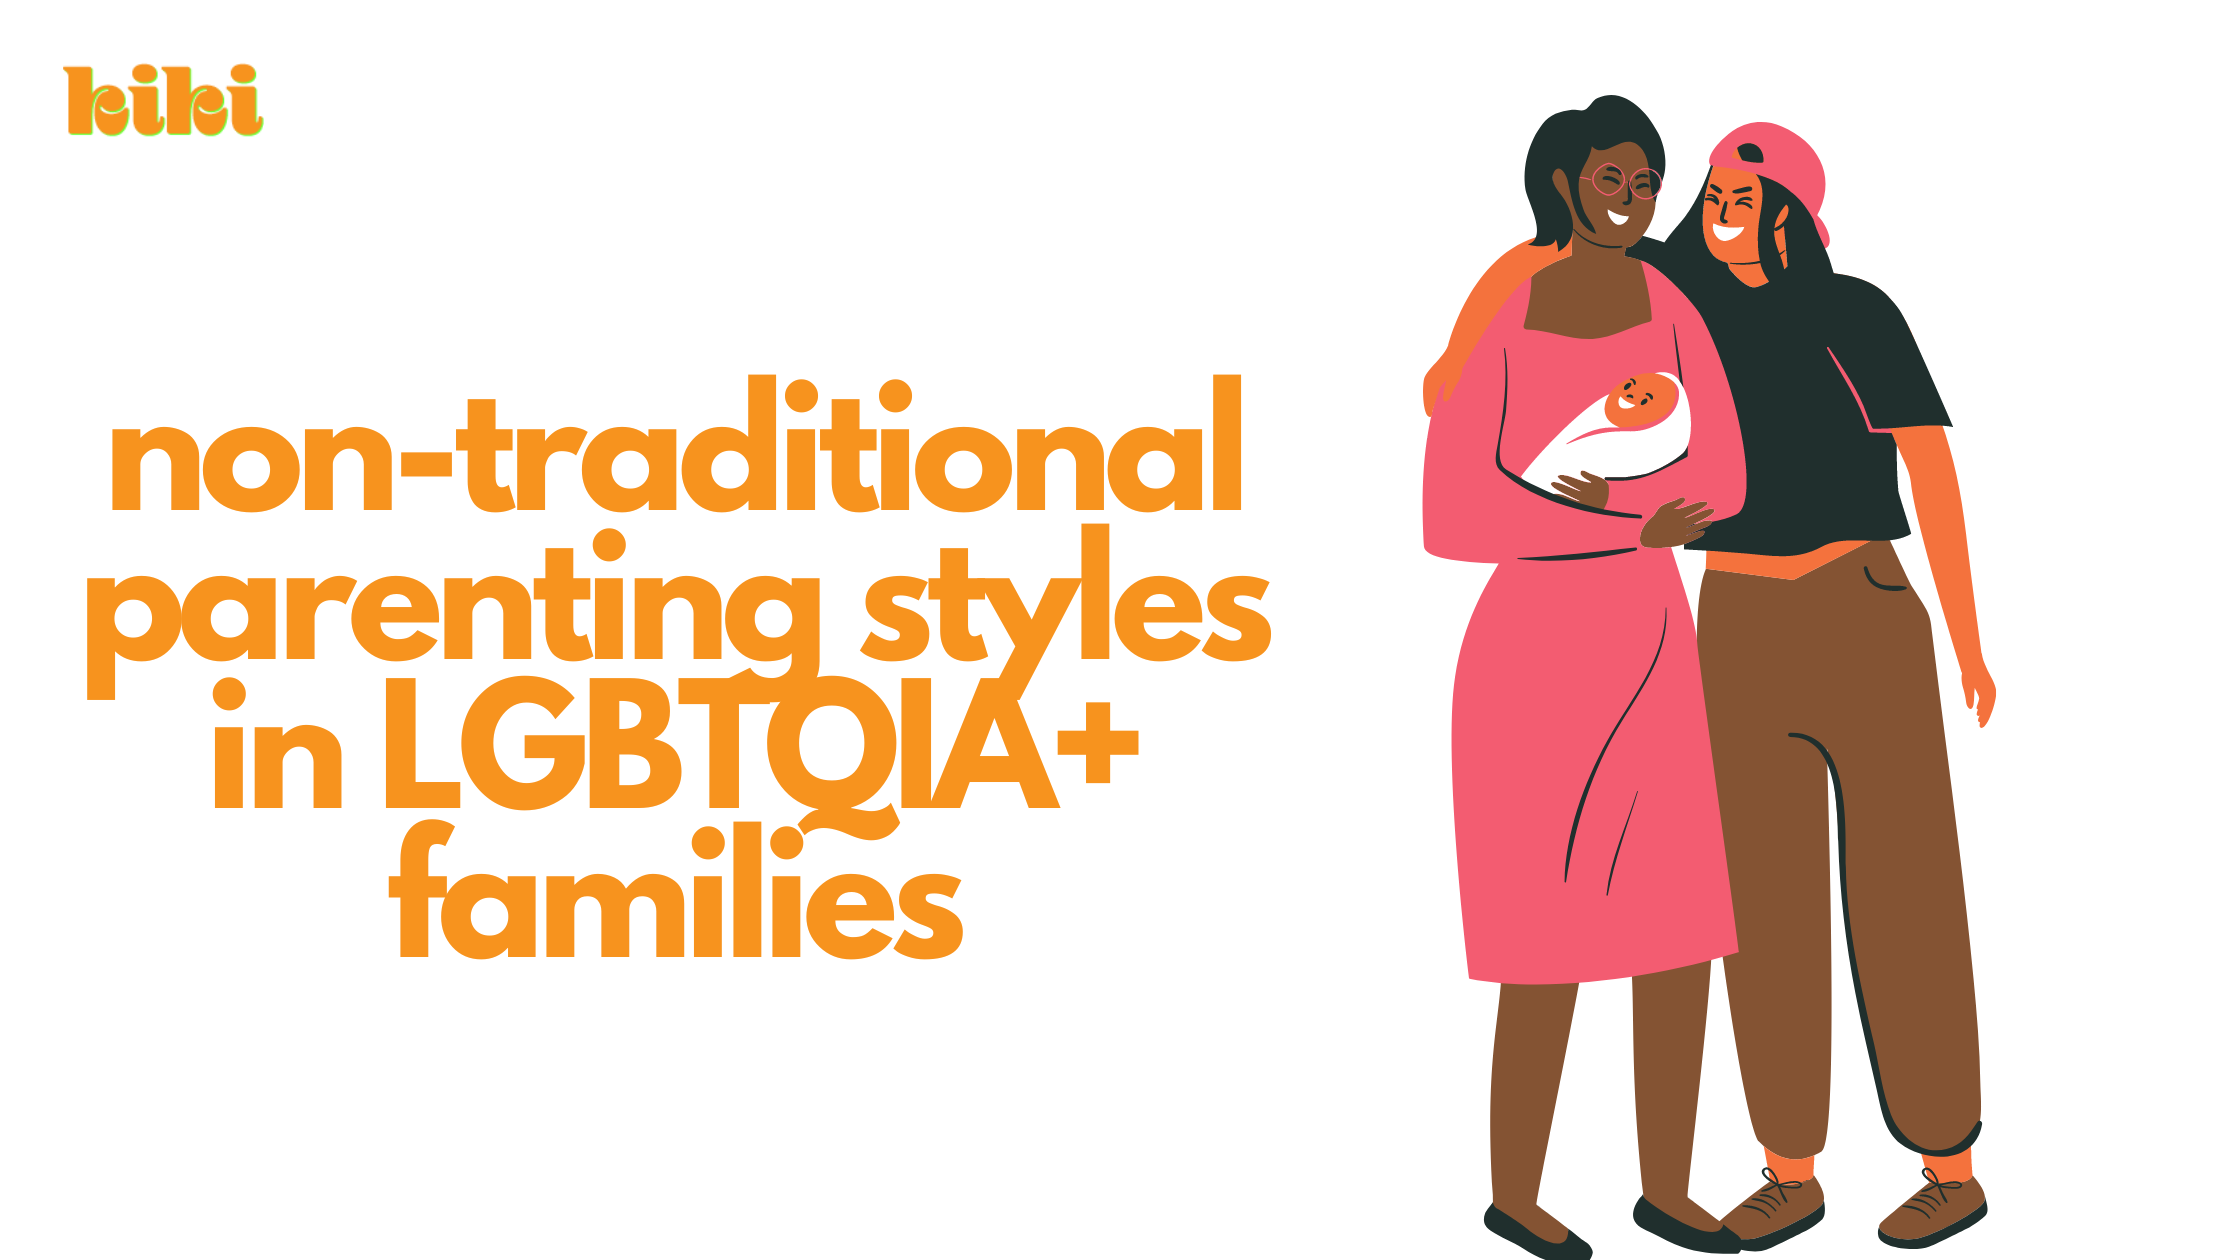 text reads: non-traditional parenting styles in LGBTQIA familes. illustration of two women standing, one of them holding a baby.